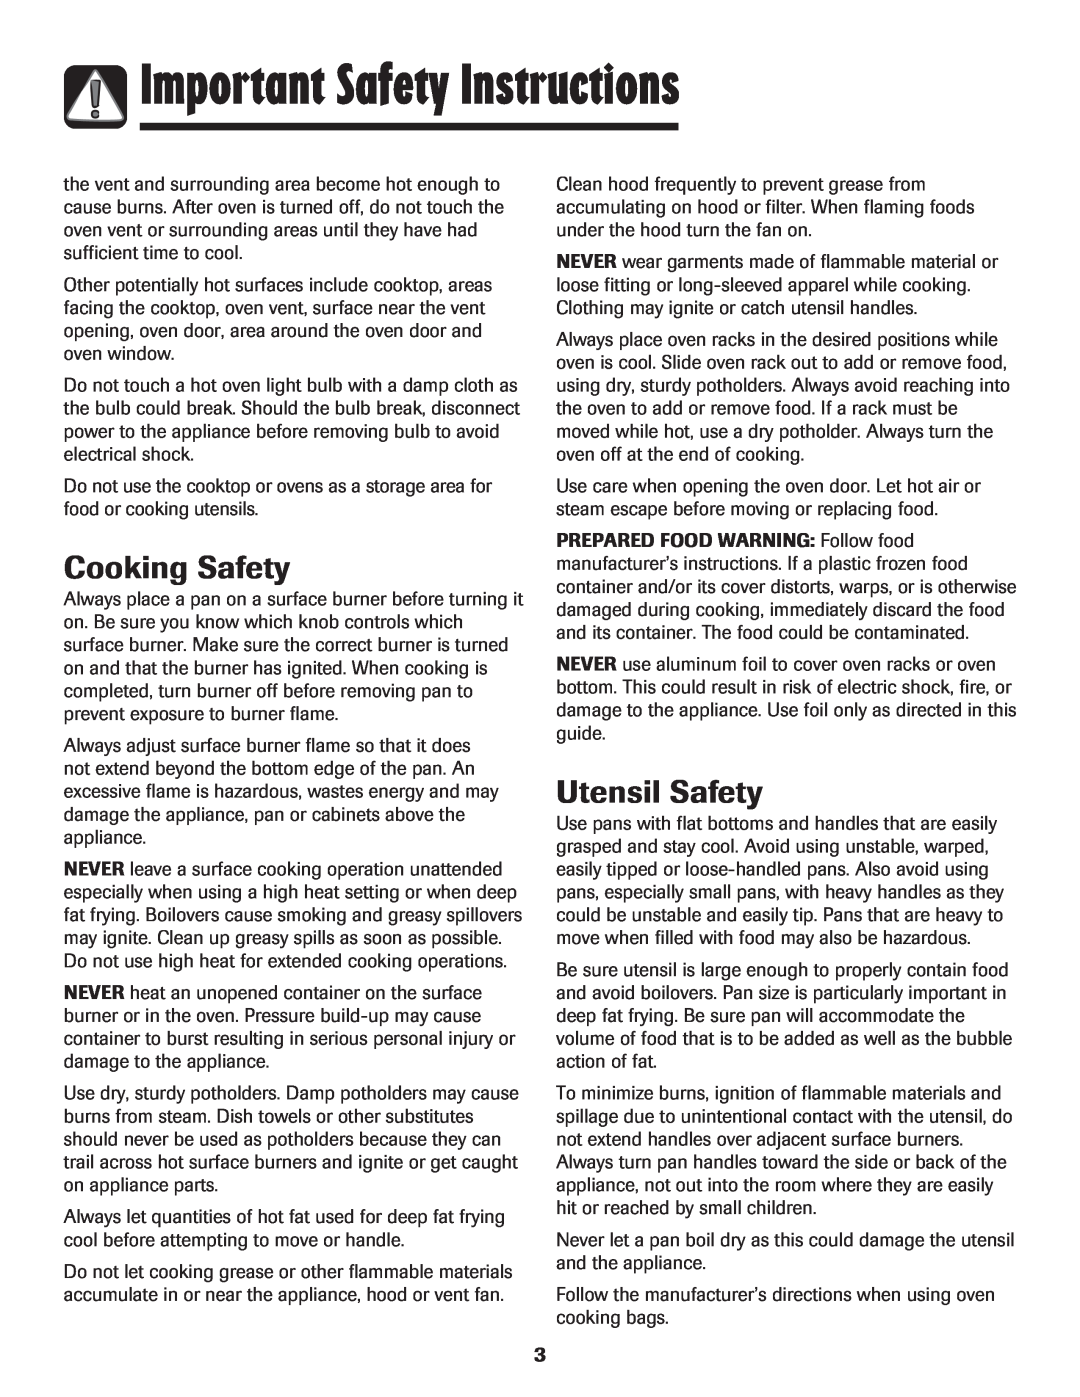 Maytag Gas - Precision Touch Control 500 Range Cooking Safety, Utensil Safety, Important Safety Instructions 